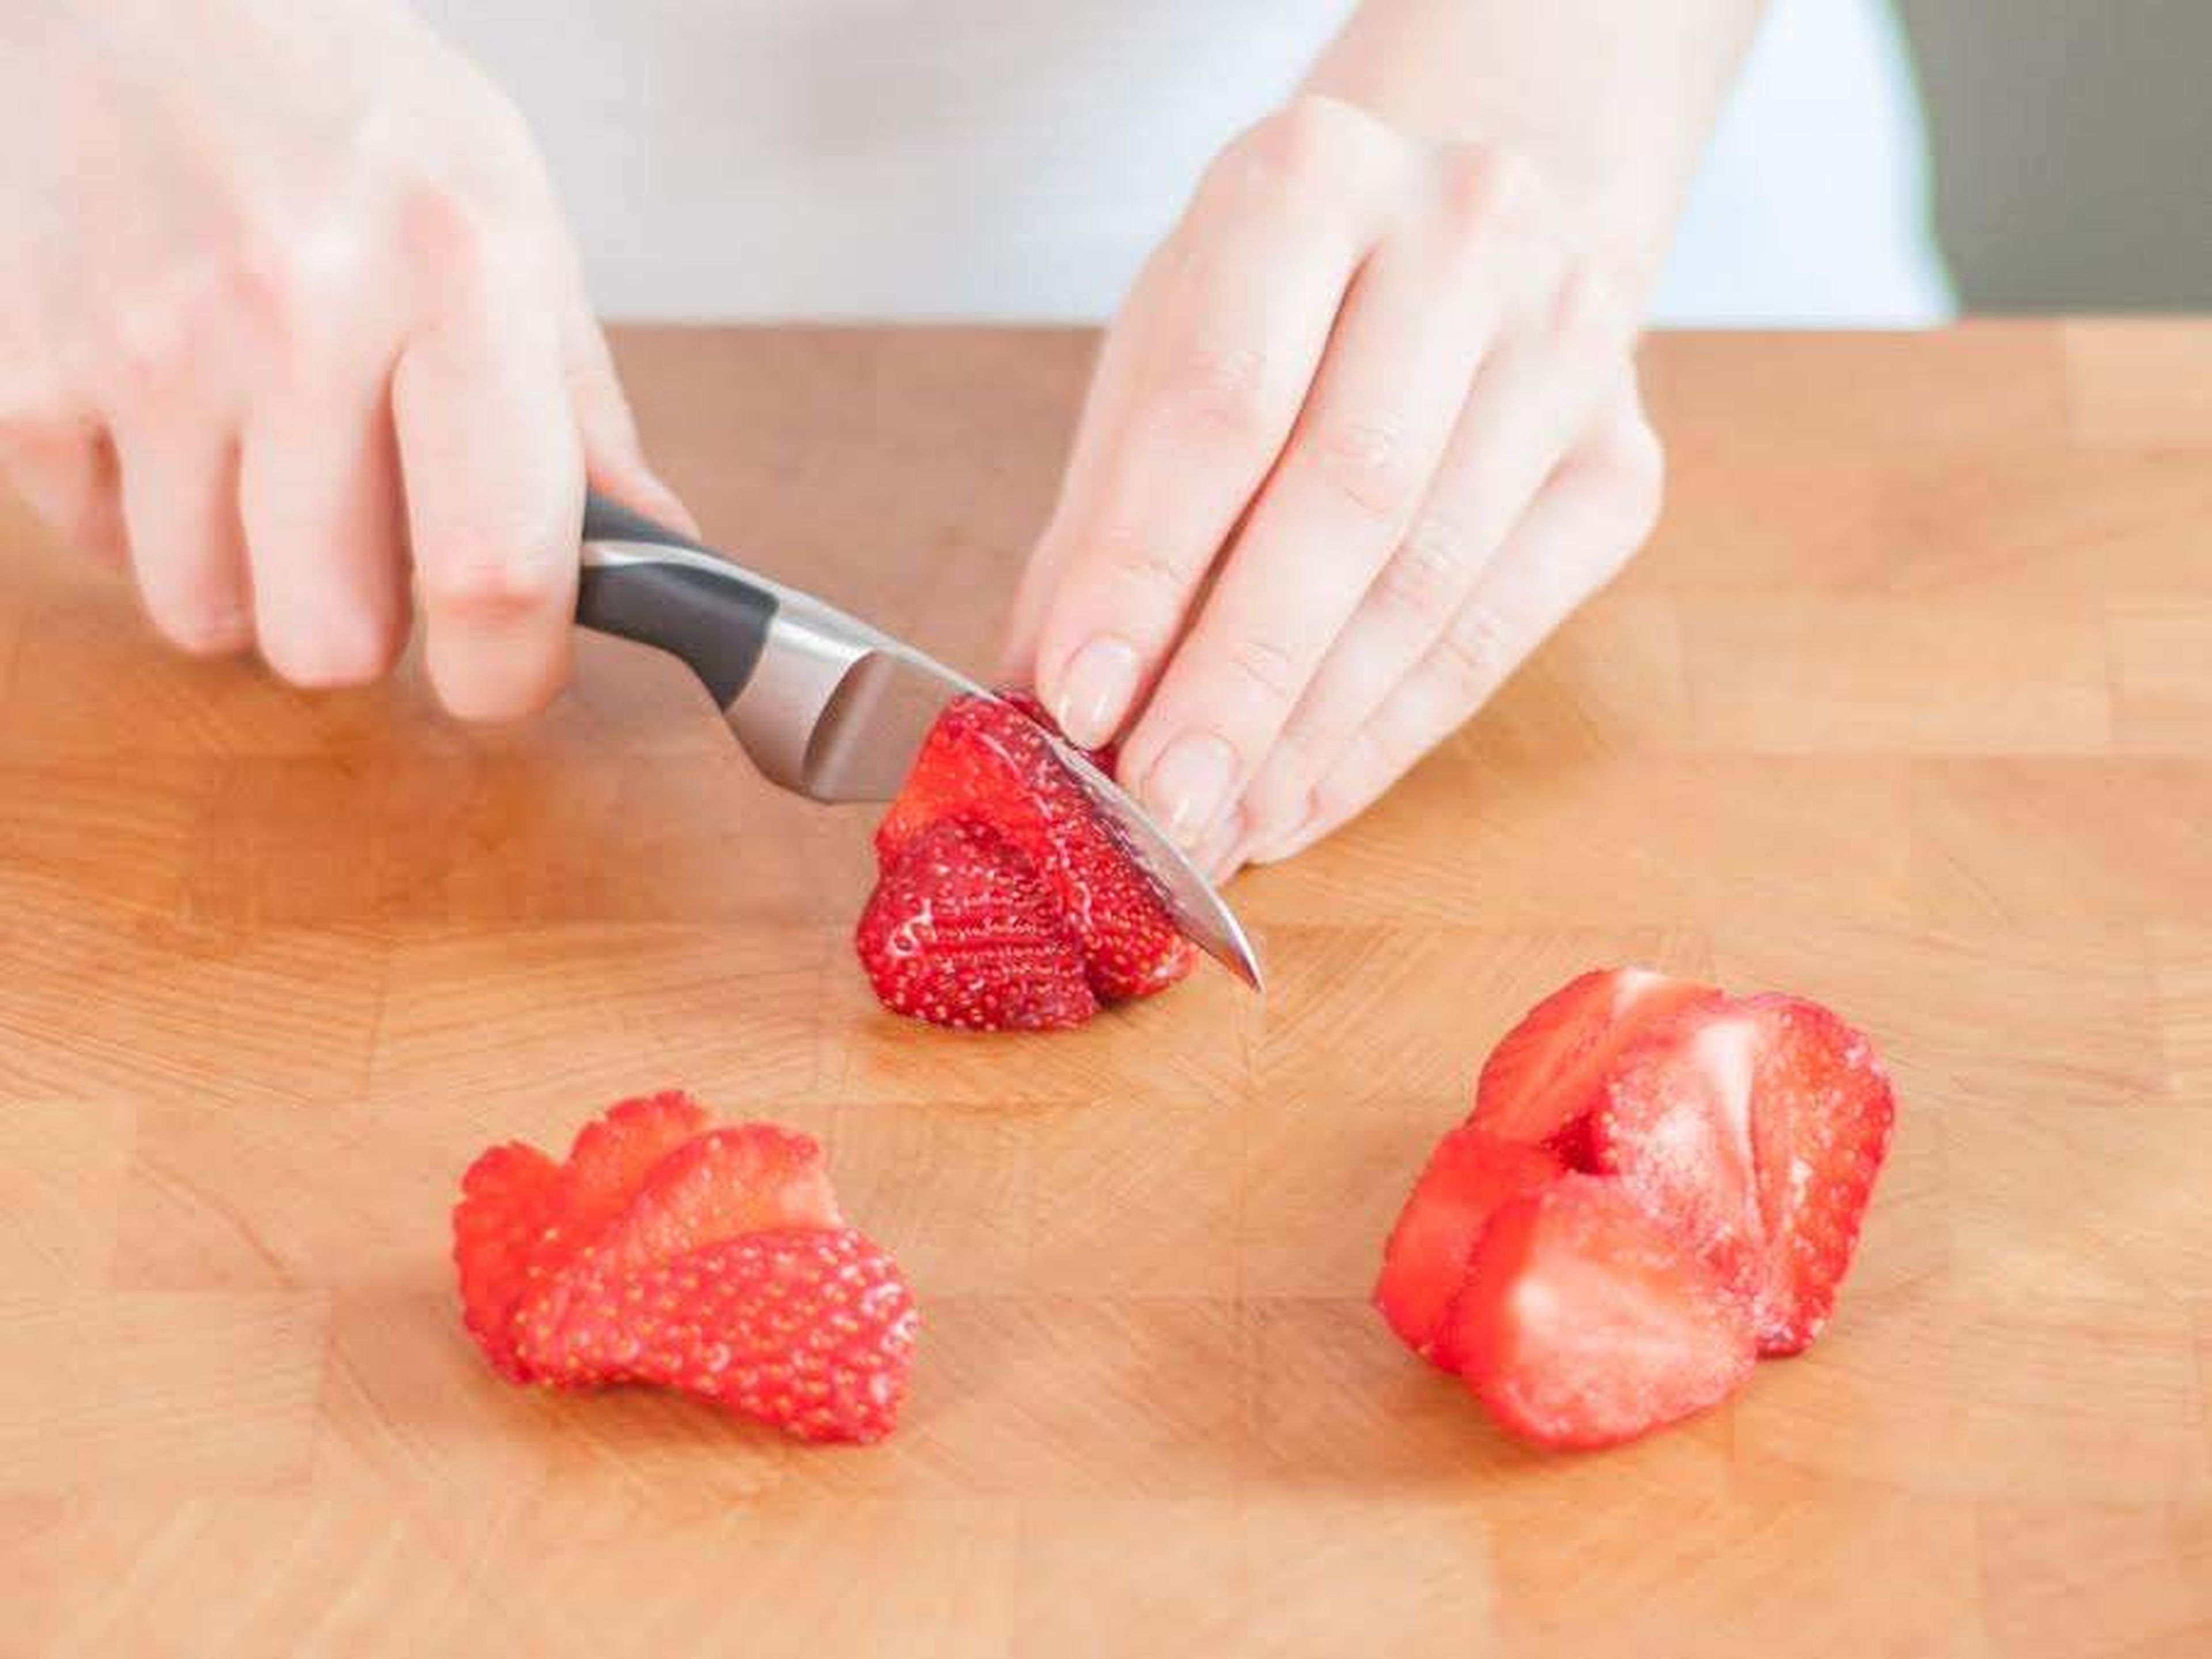 Preheat oven to 190°C/375°F. Line baking sheet with parchment paper. Hull and halve a part of the strawberries and place in a large bowl. Slice remaining strawberries and set aside in a separate bowl.